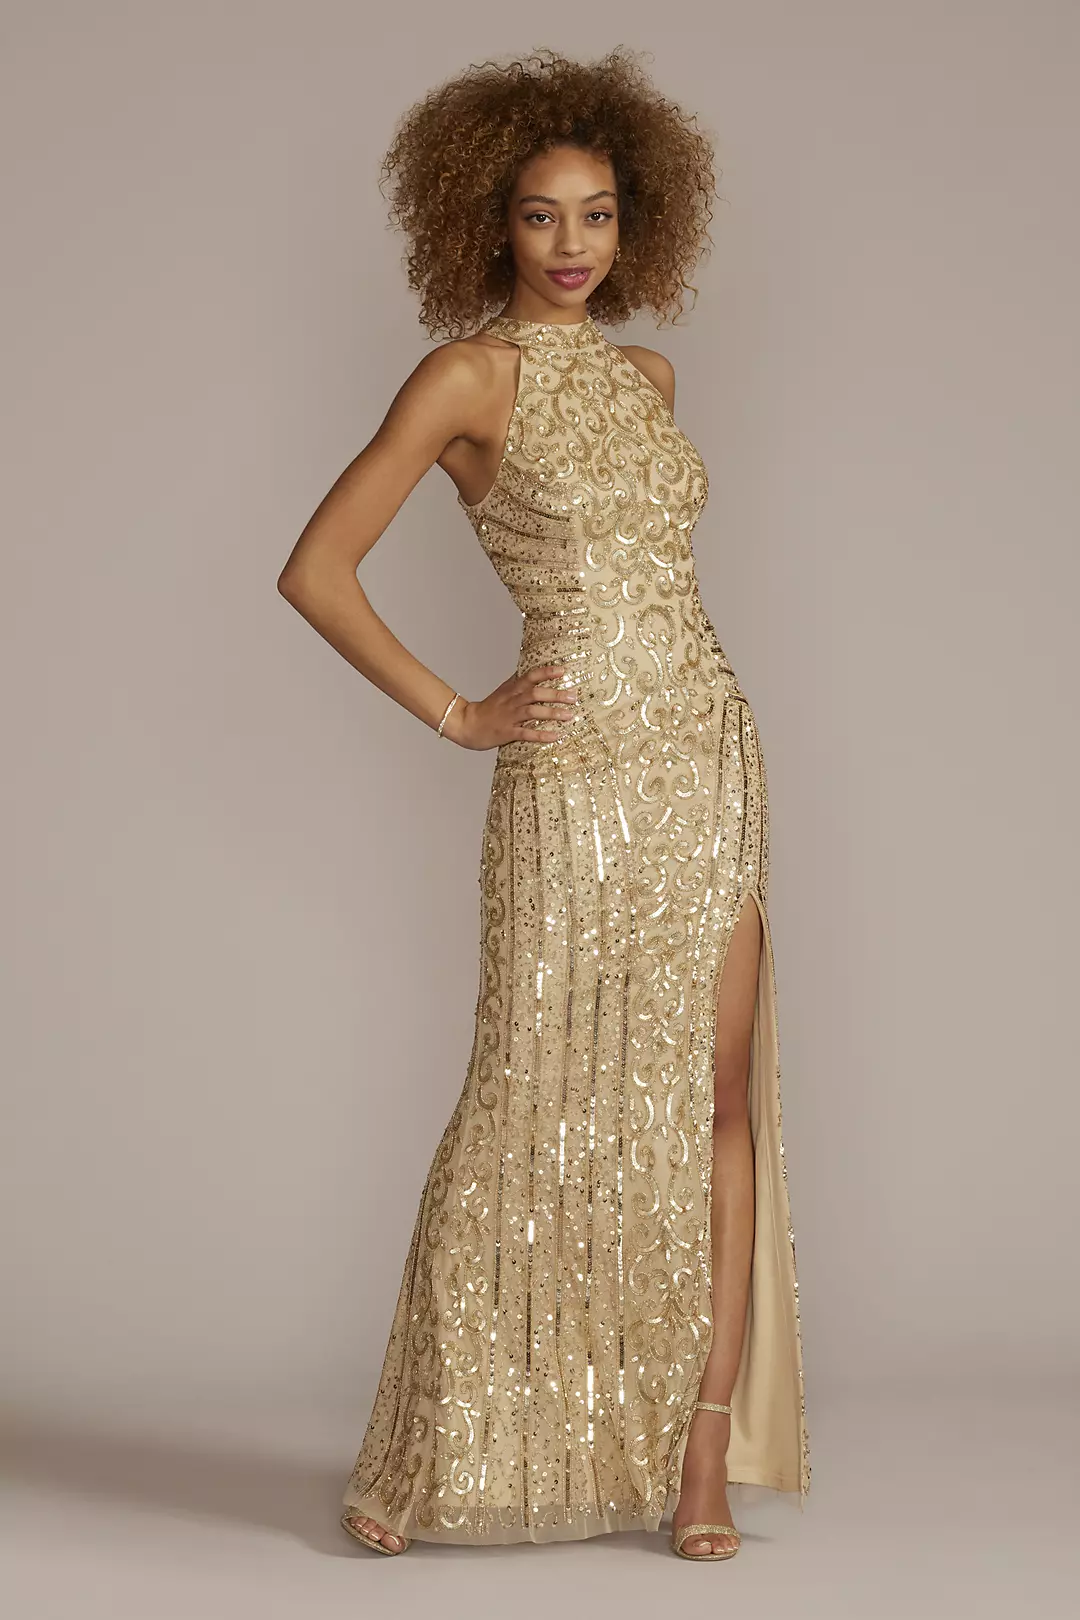 Sequin Halter Neck Gown with Skirt Slit Image